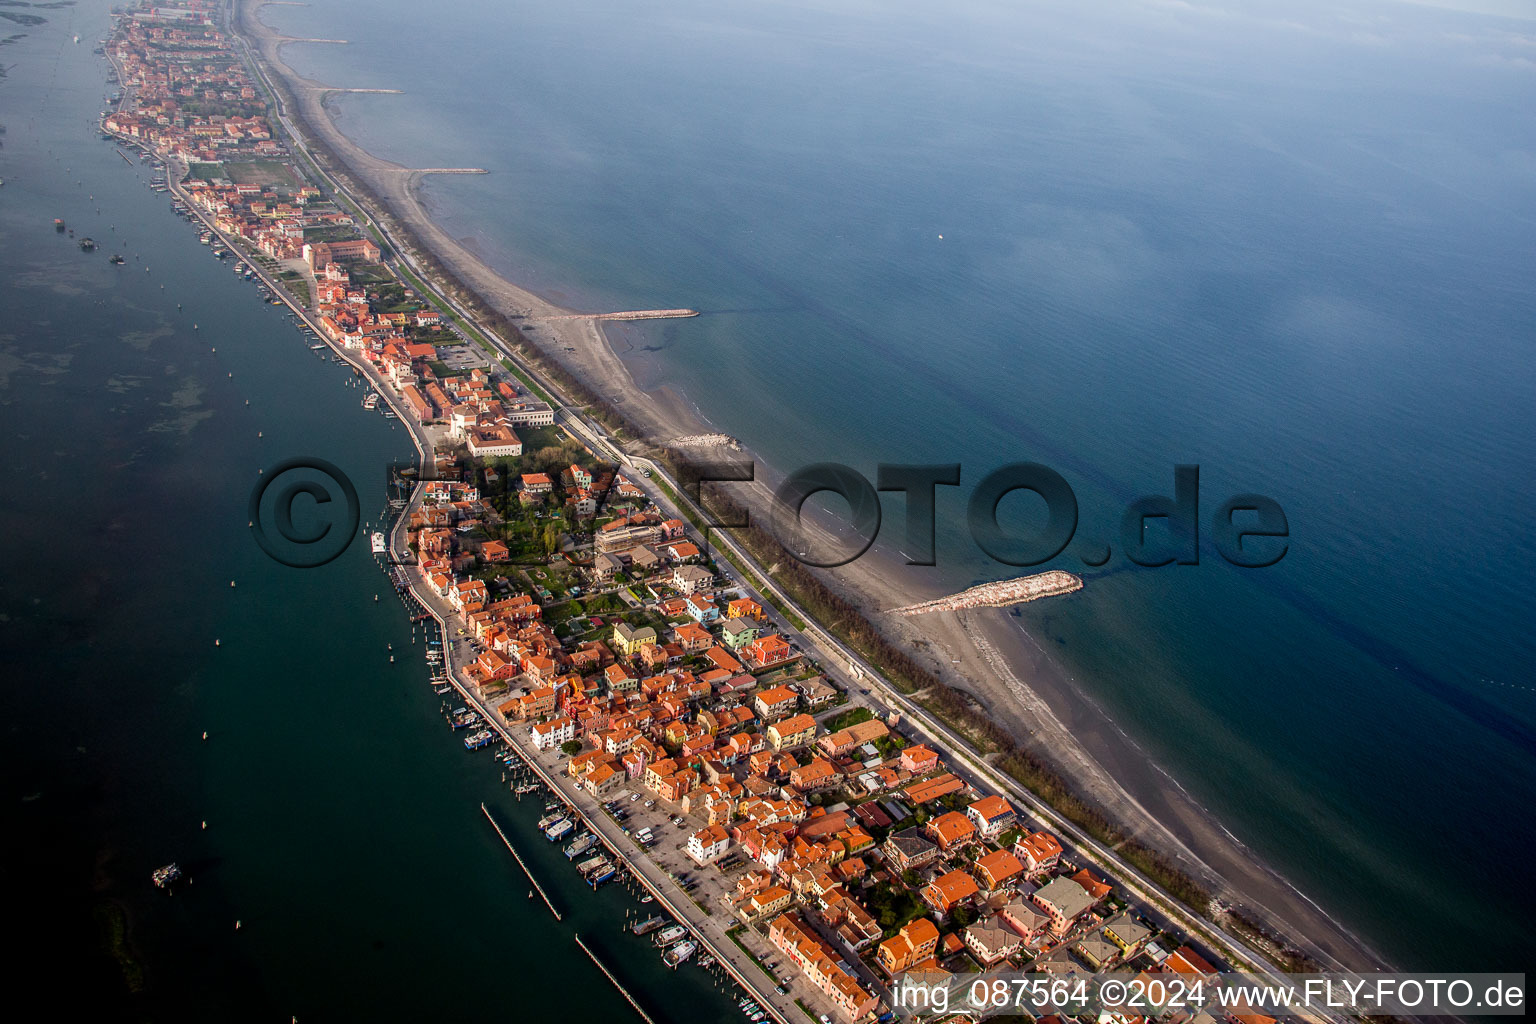 Townscape on the seacoast of Mediterranean Sea in San Vito in Veneto, Italy from the drone perspective